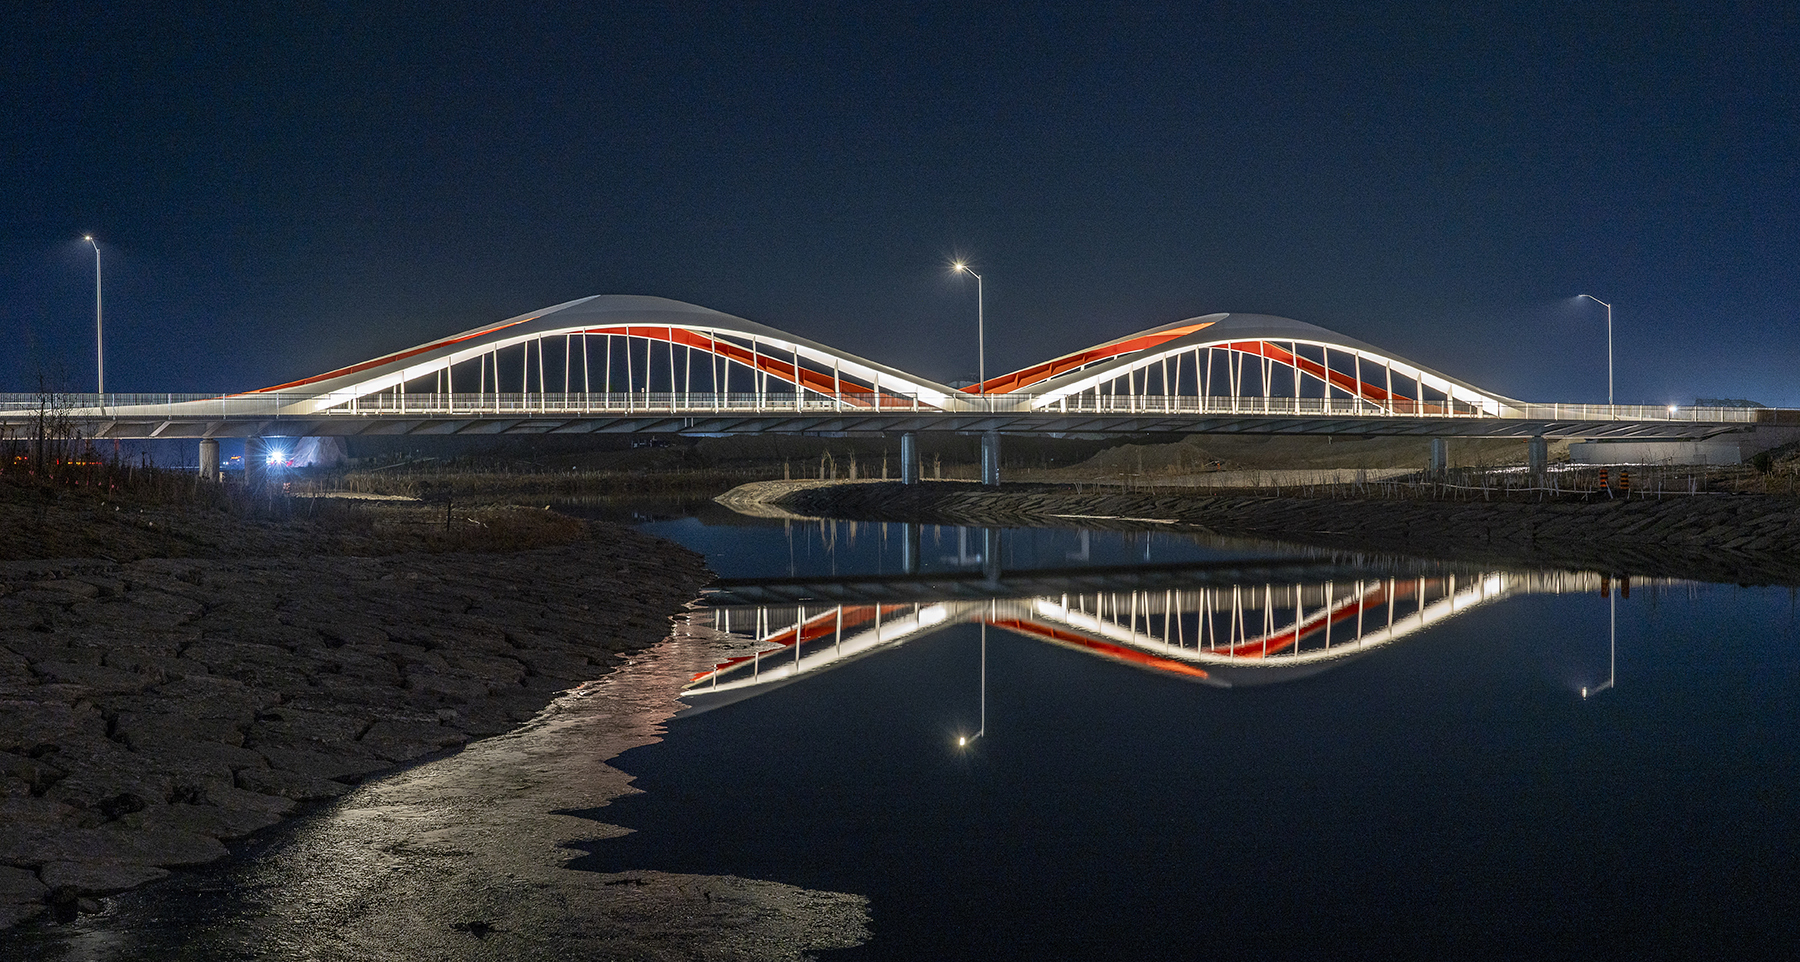 image of bridge over water at nighttime